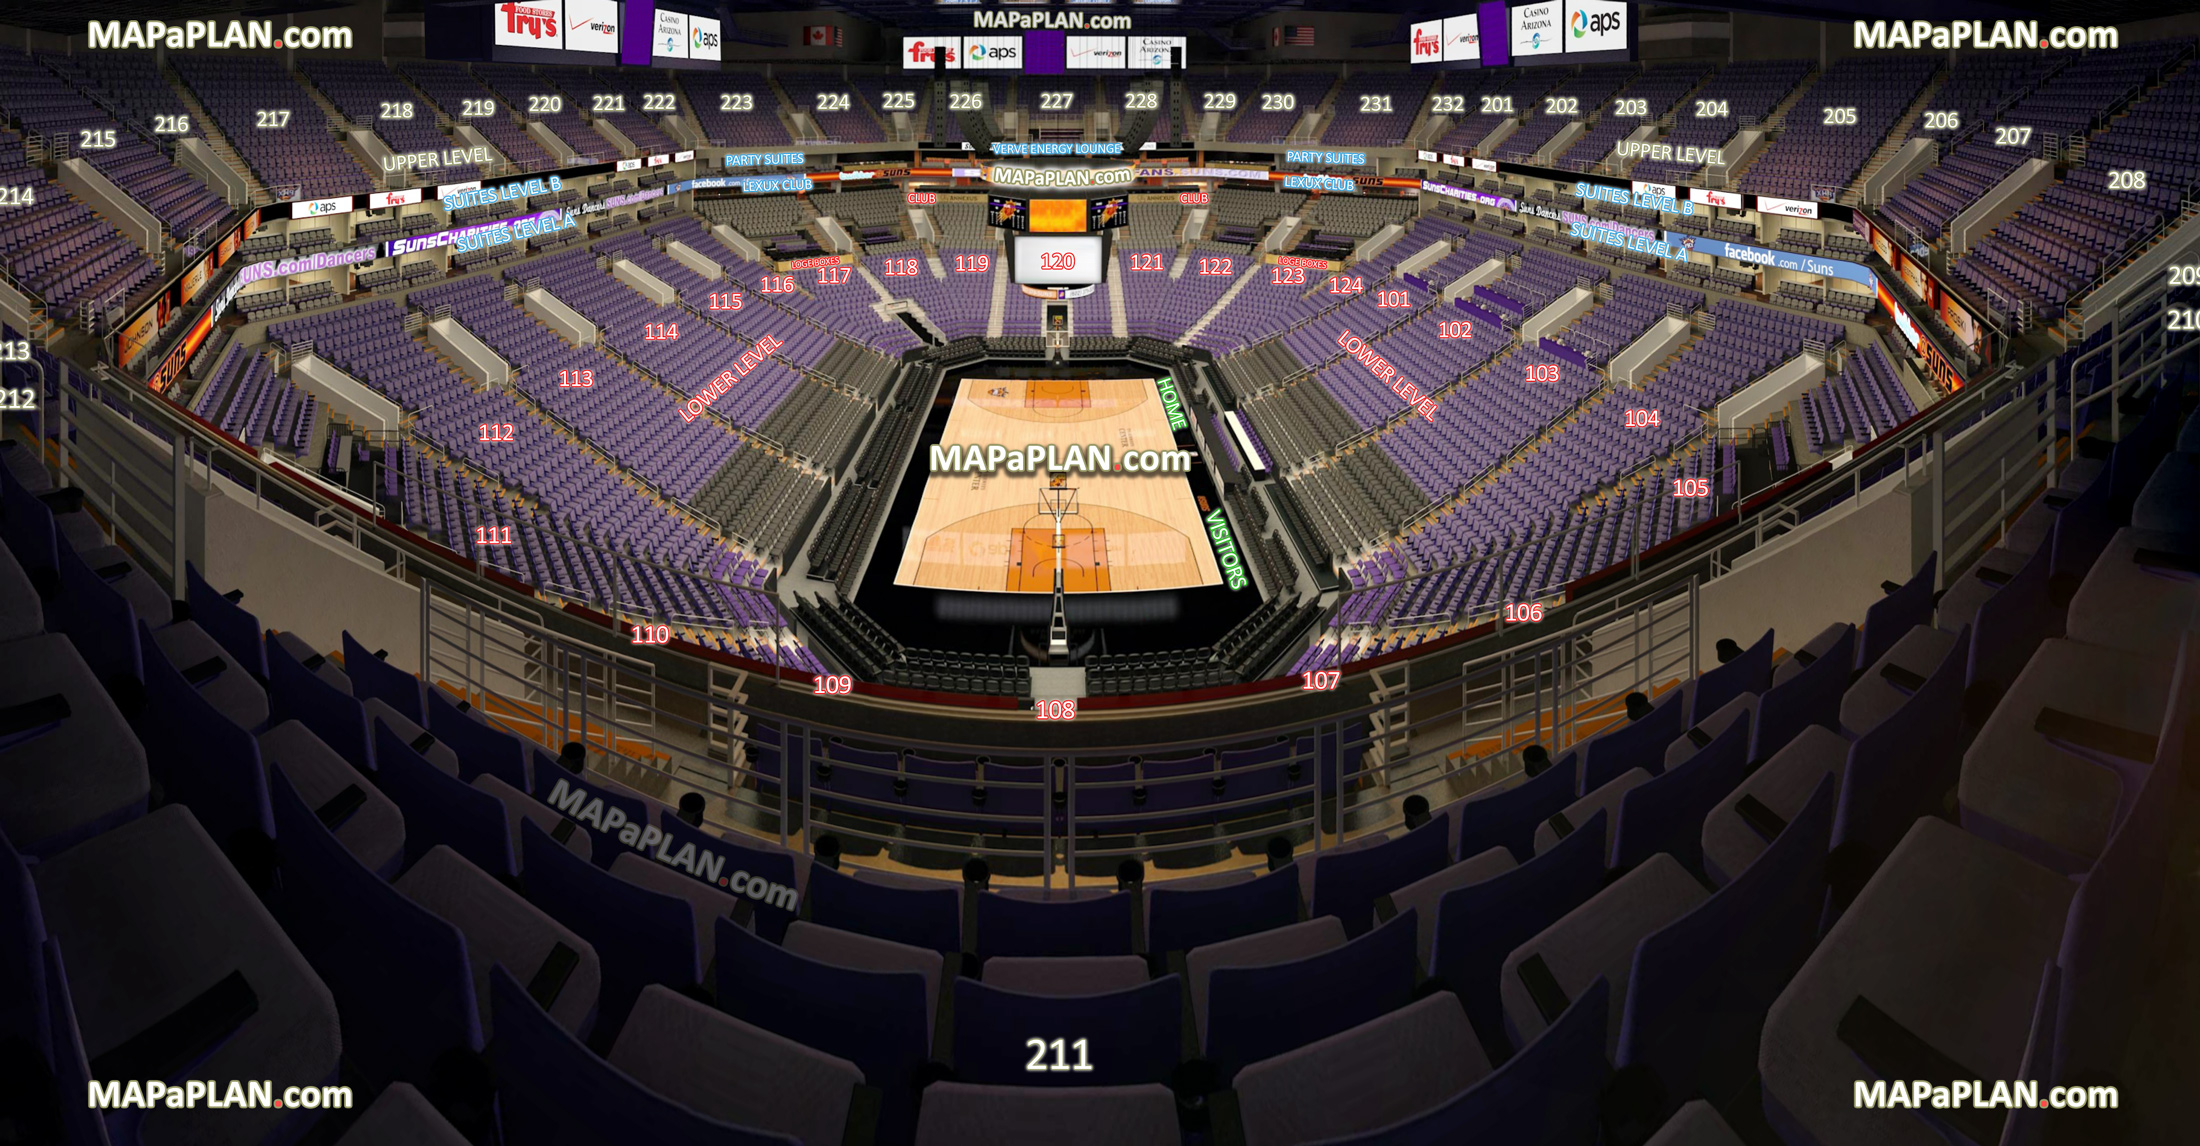 view section 211 row 10 seat 8 suns mercury wnba ncaa college basketball tournament home visitors bench court sideline baseline corner courtside club end Phoenix Talking Stick Resort Arena seating chart